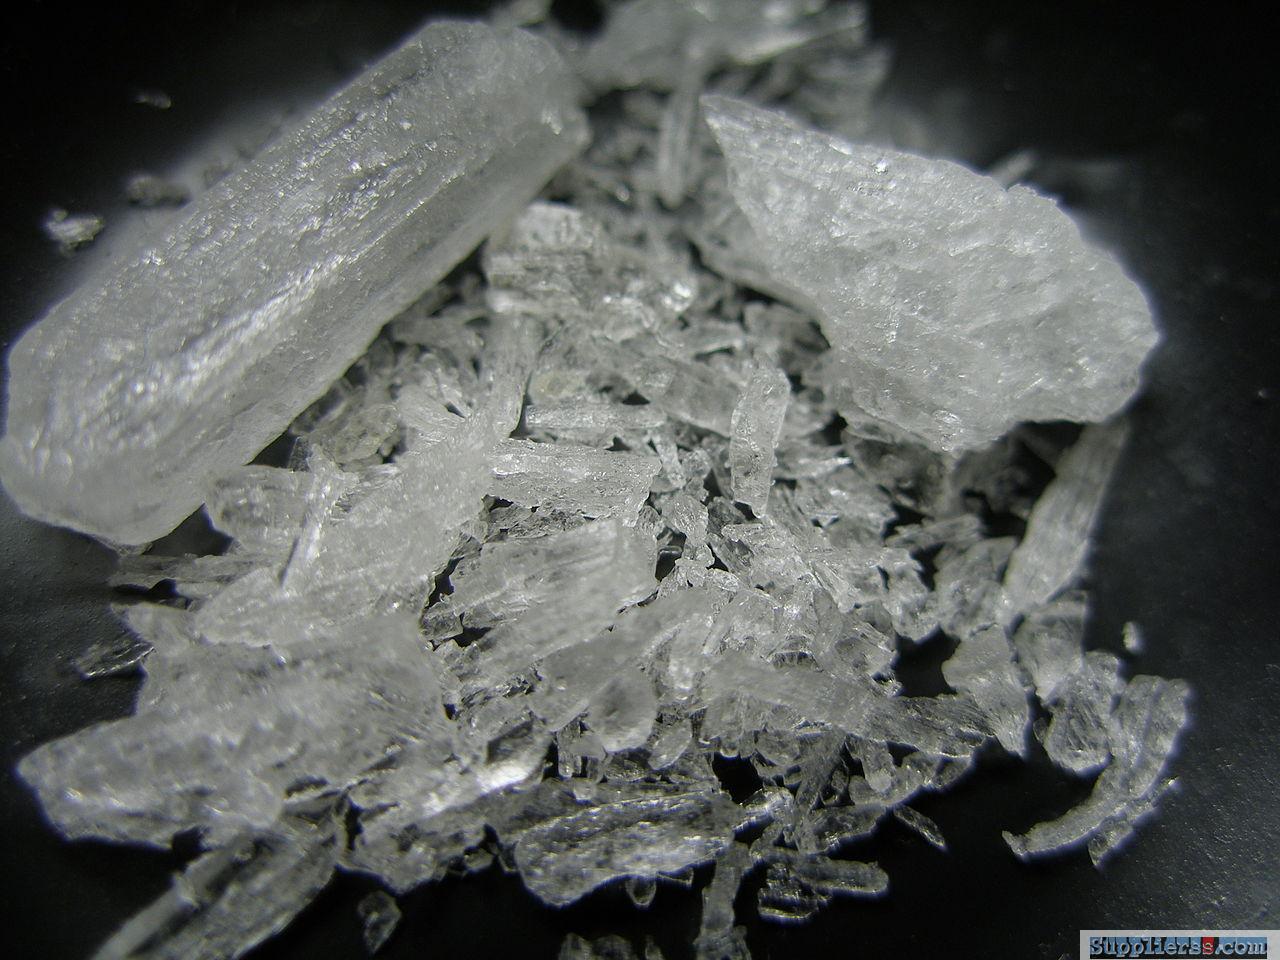 Buy Research Chemical, Bath Salts And Herbal Incense Online